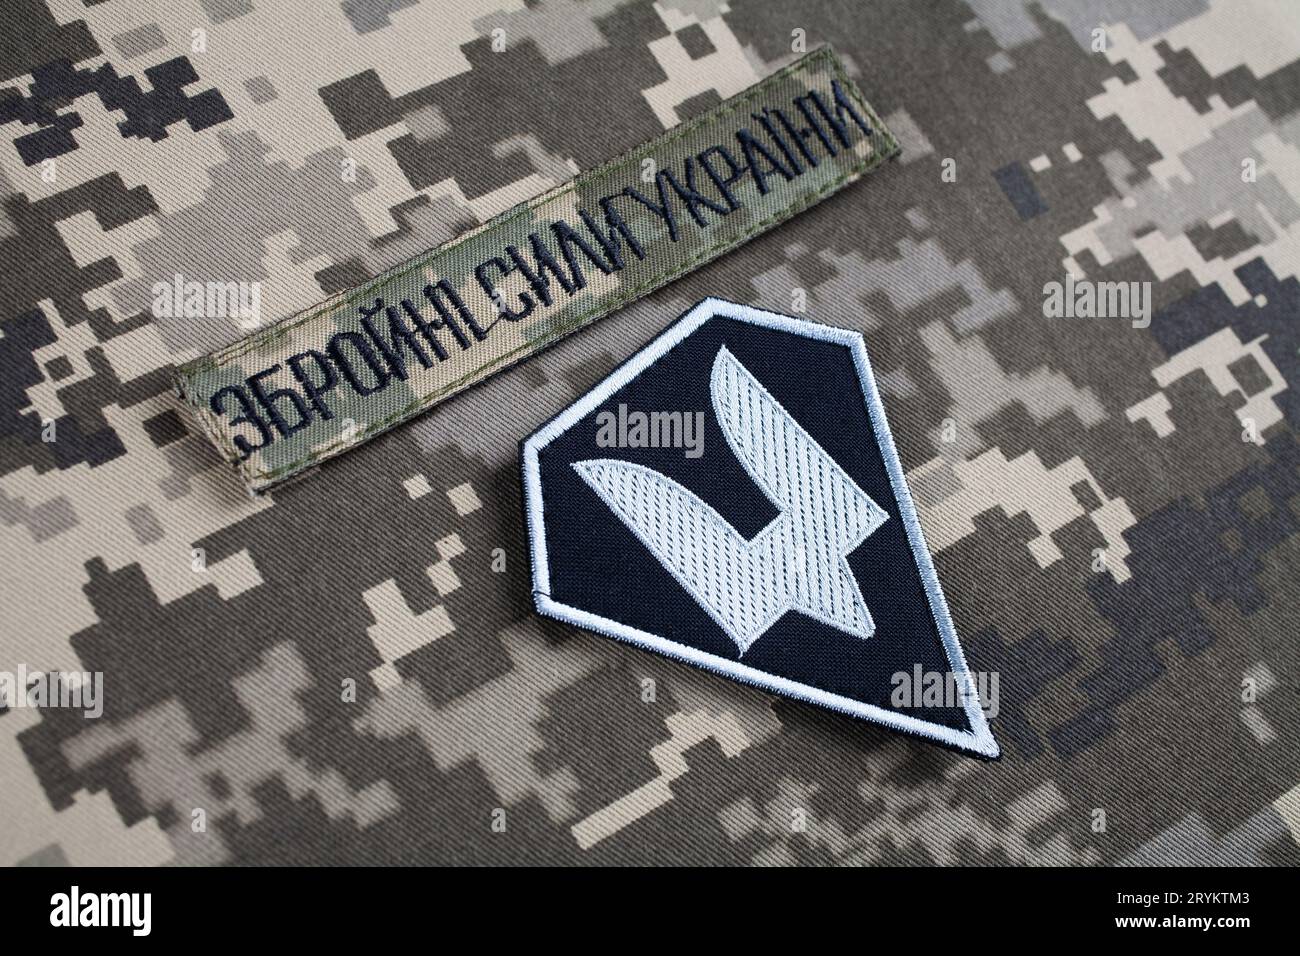 KYIV, UKRAINE - October 6, 2022. Russian invasion in Ukraine 2022. The Special Operations Forces of Ukraine Army uniform insignia badges on camouflage Stock Photo